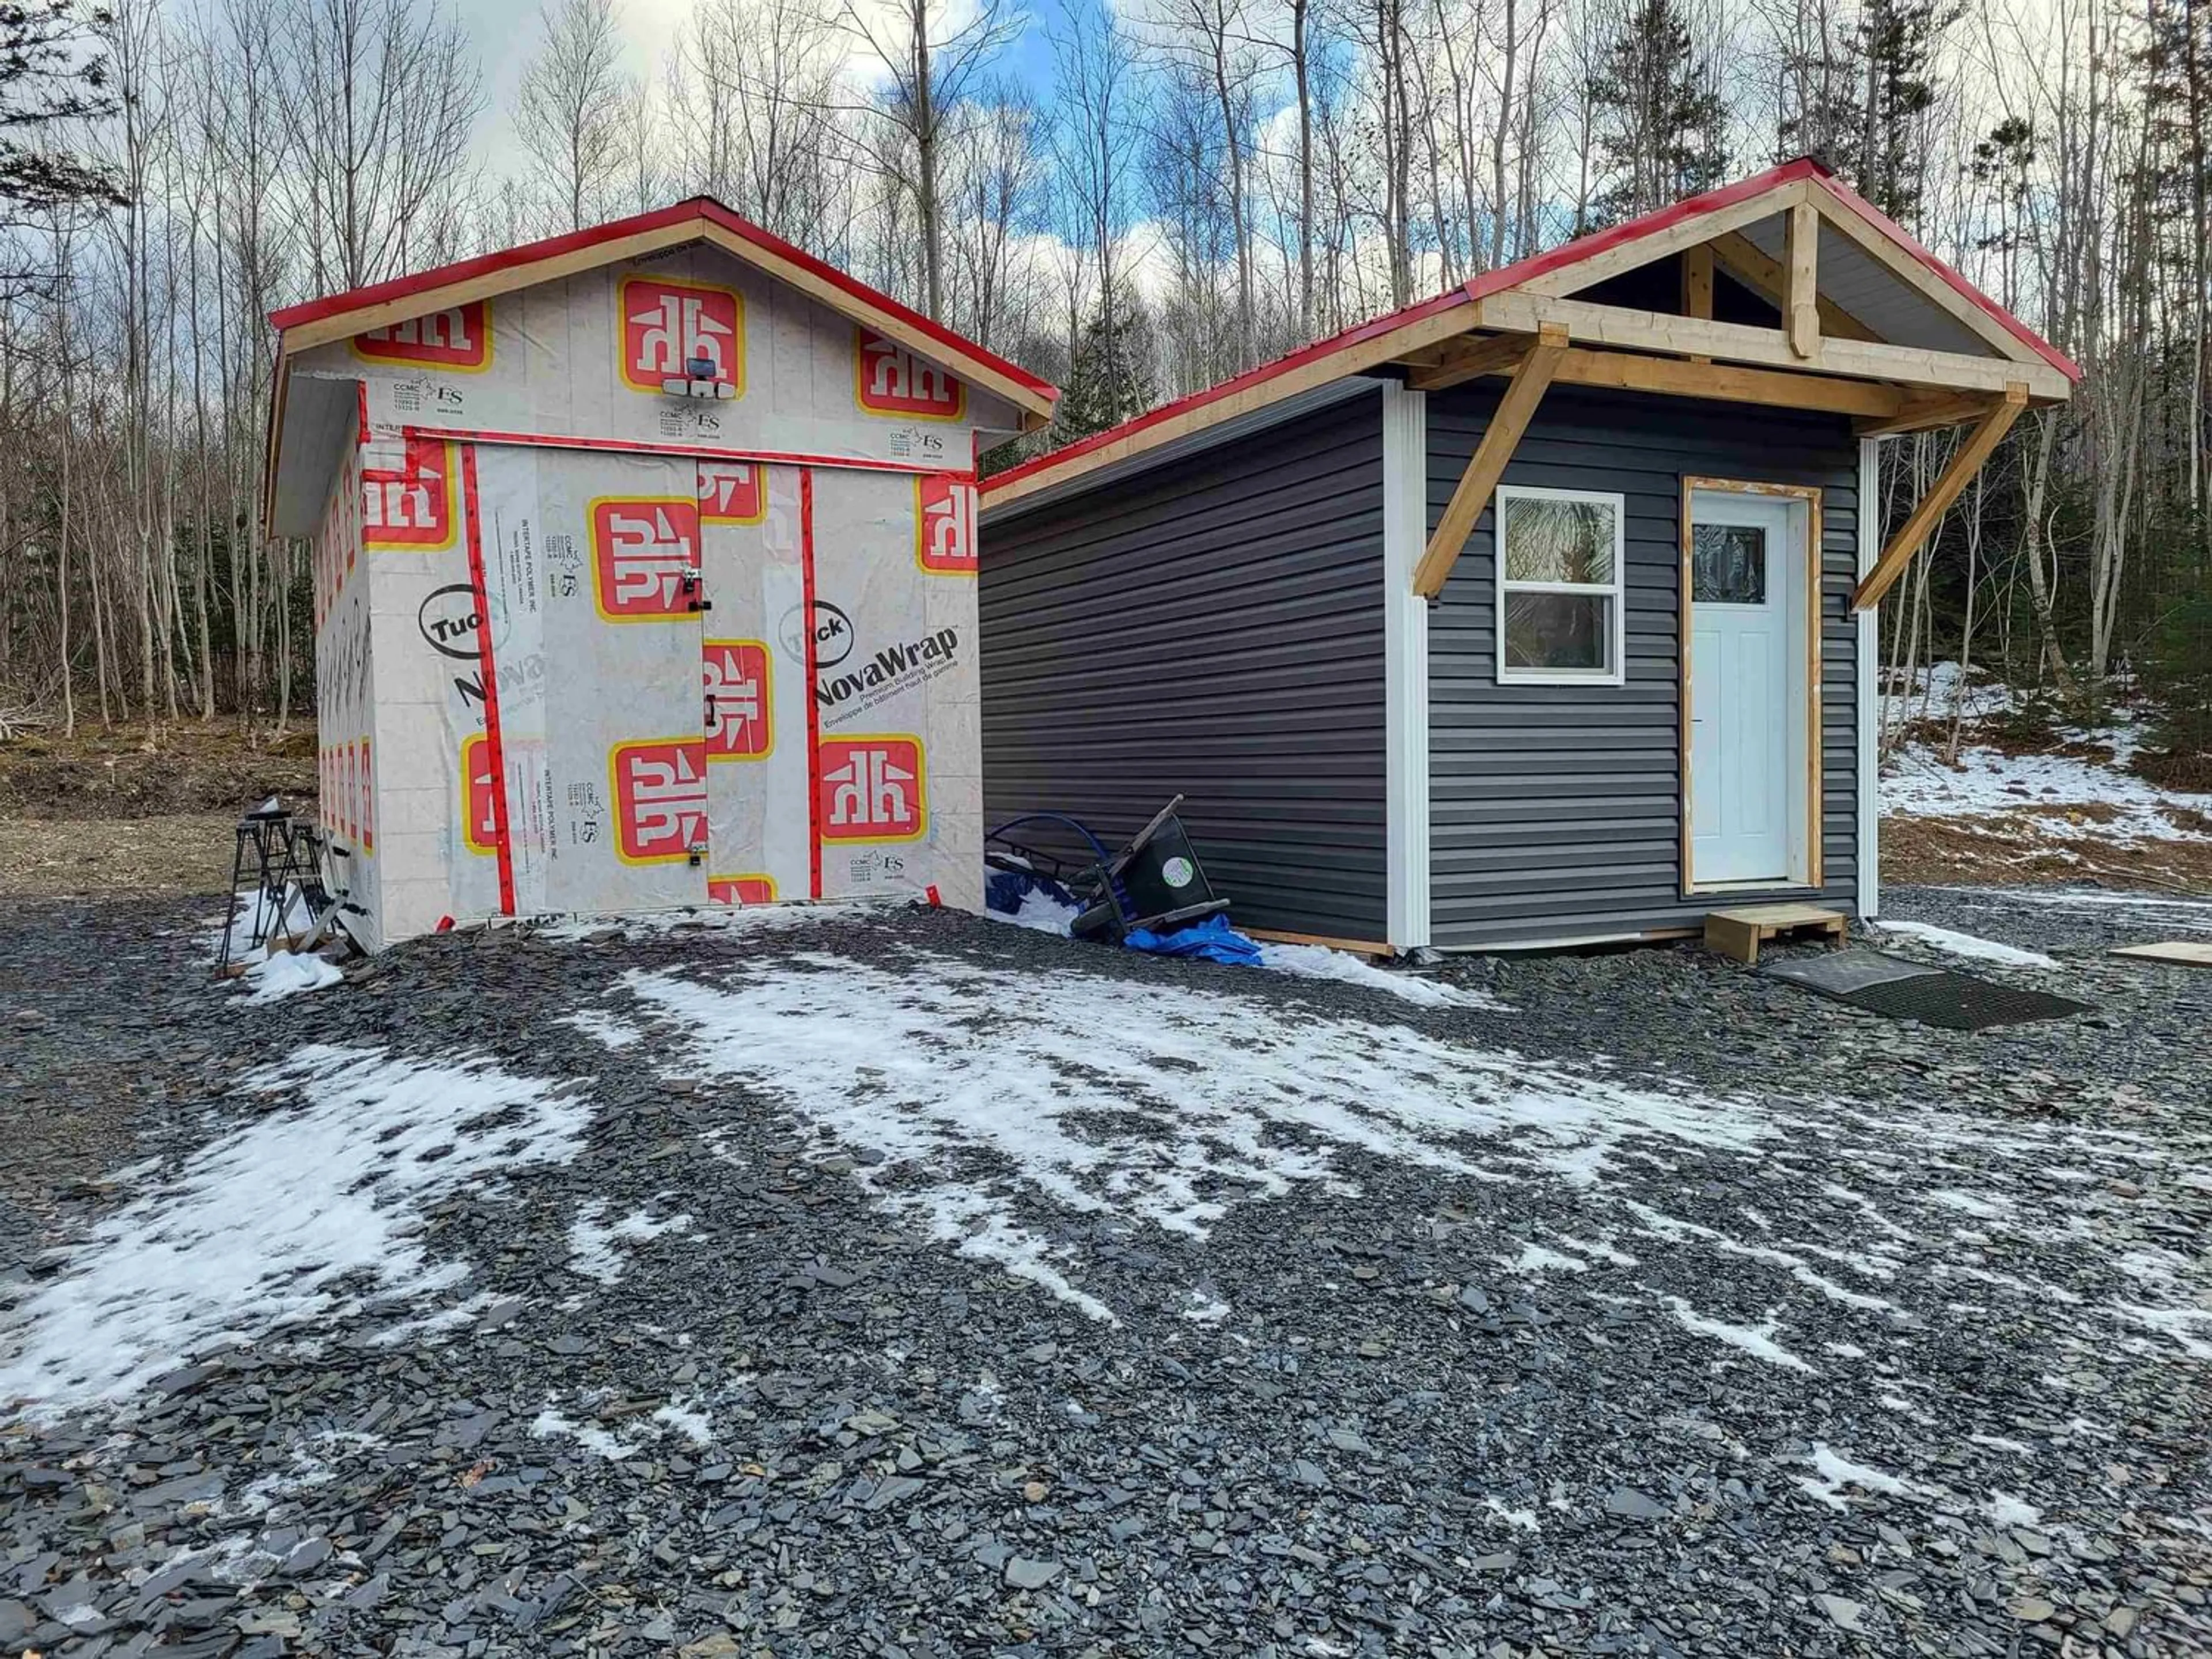 Home with unknown exterior material for 977 Purdy Road, Bear River Nova Scotia B0S 1B0